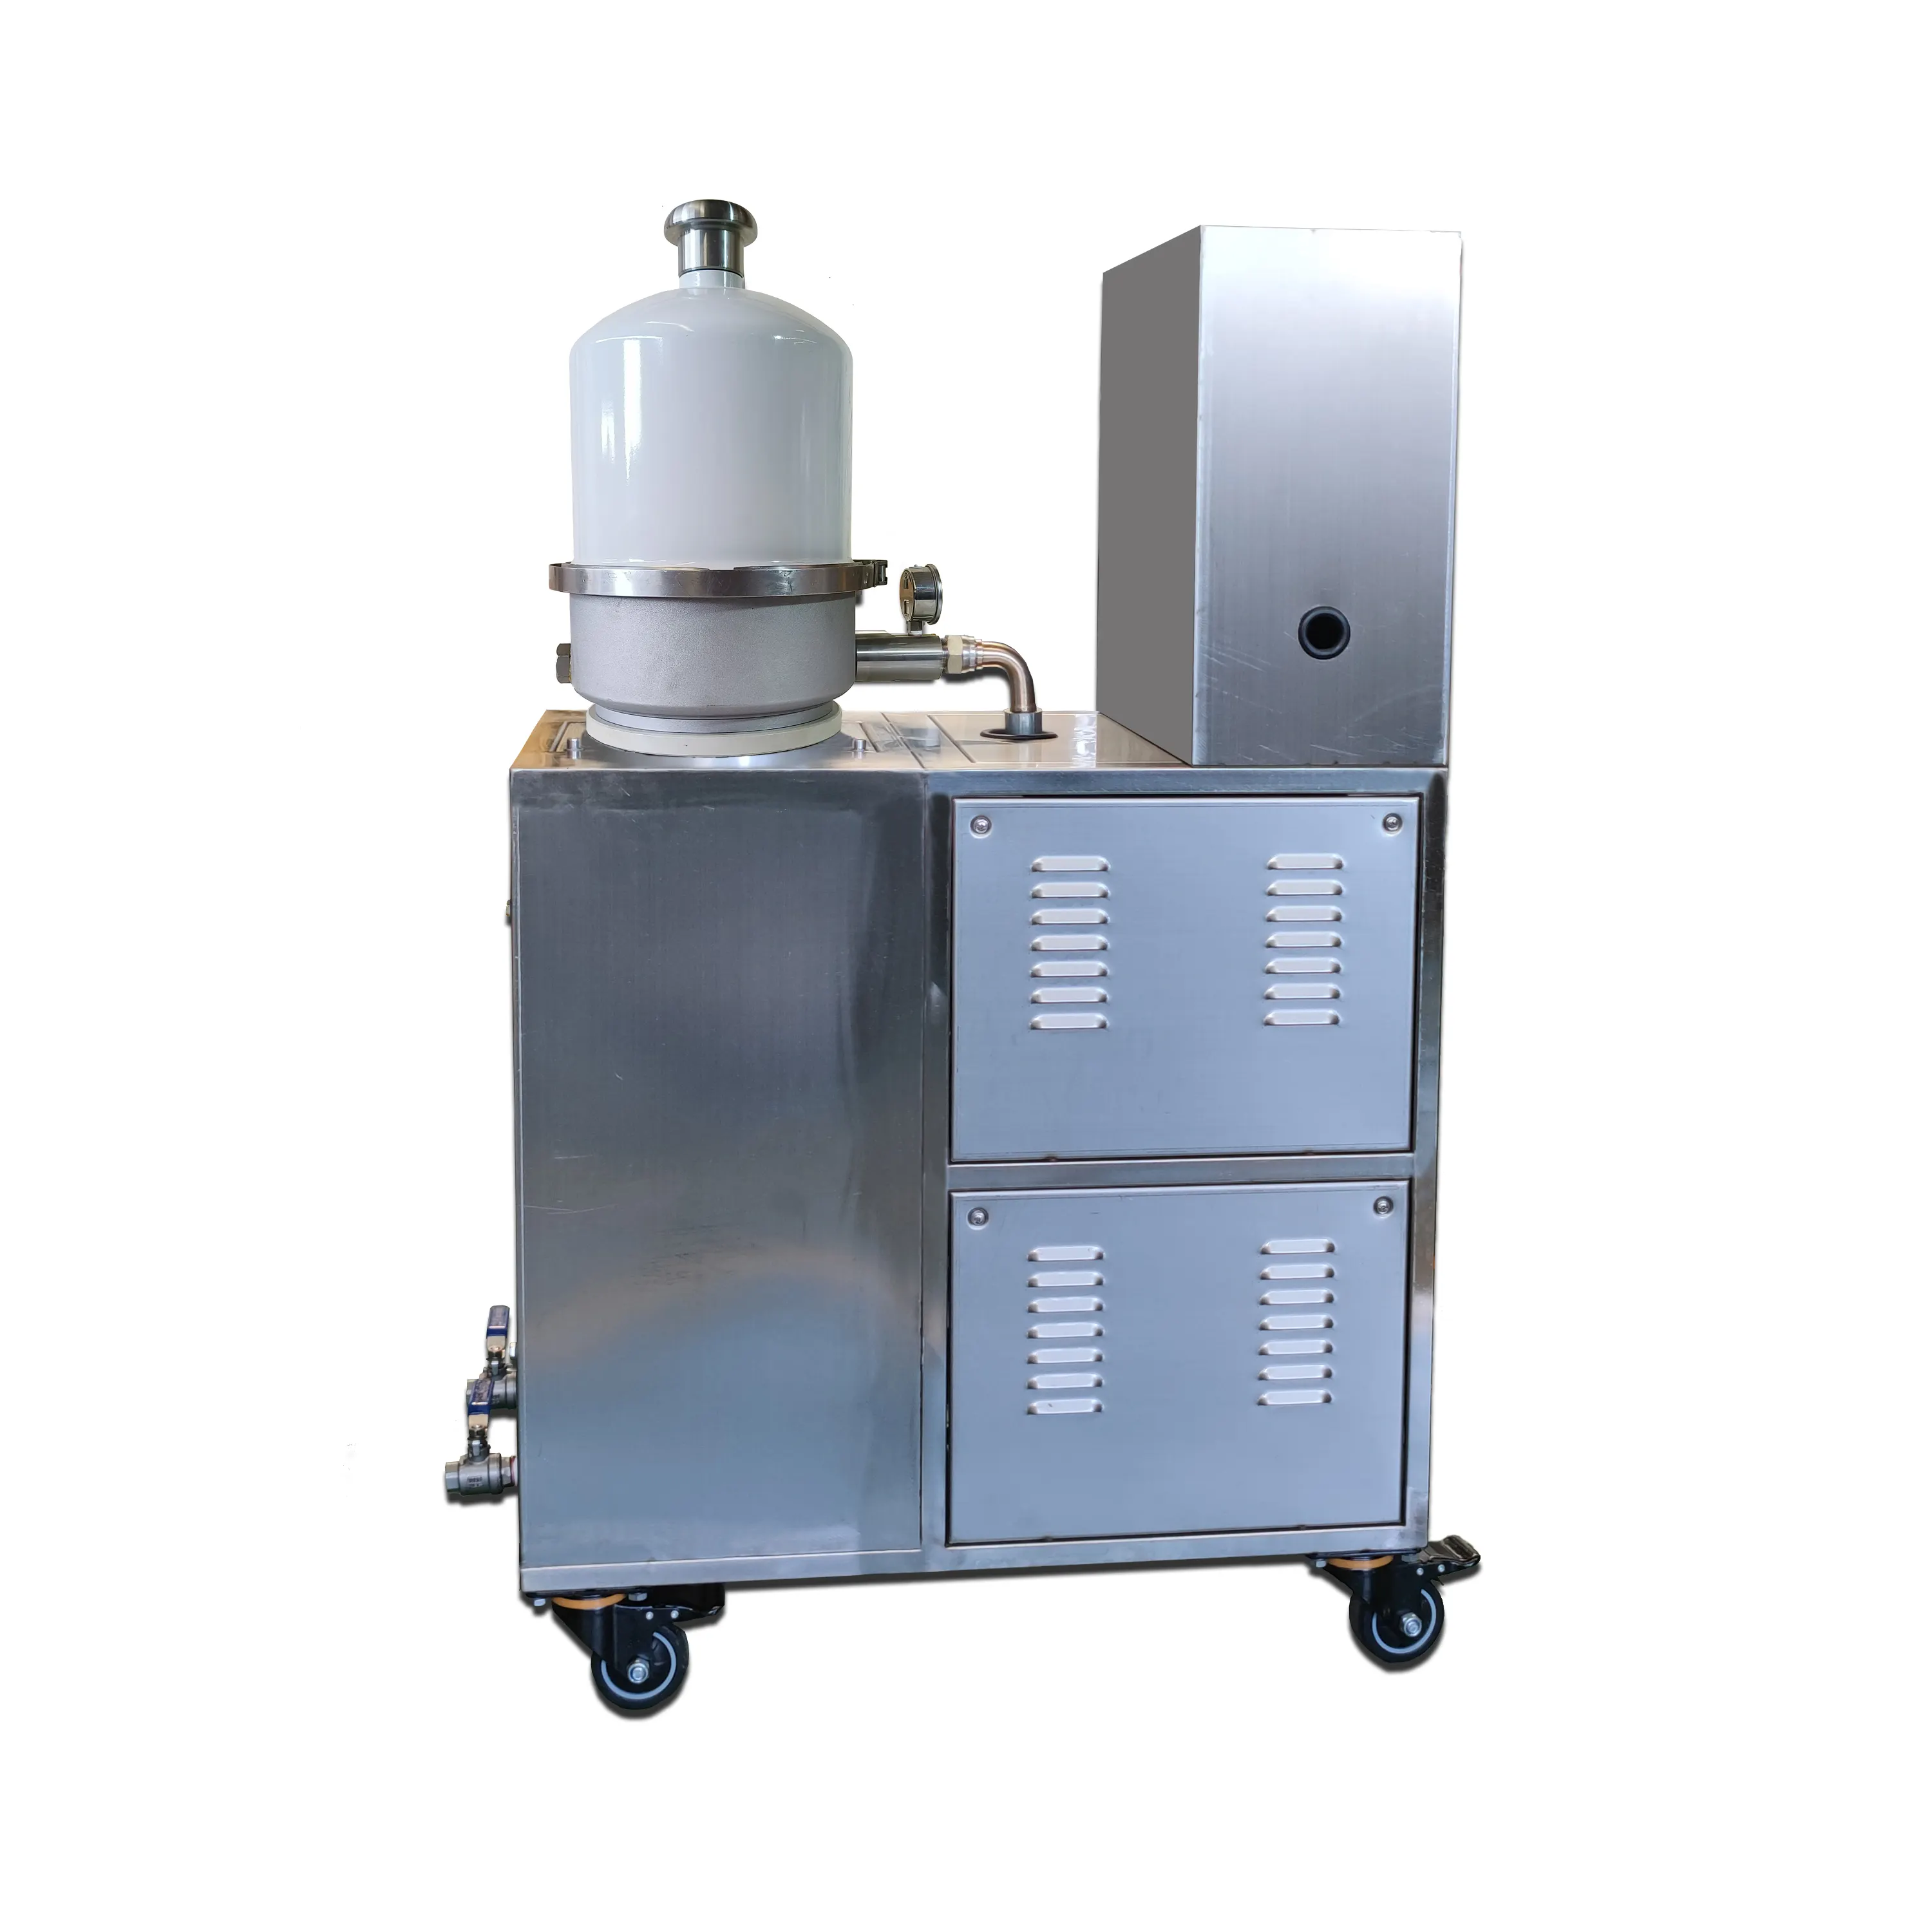 Oil filtration machine for the lubricants